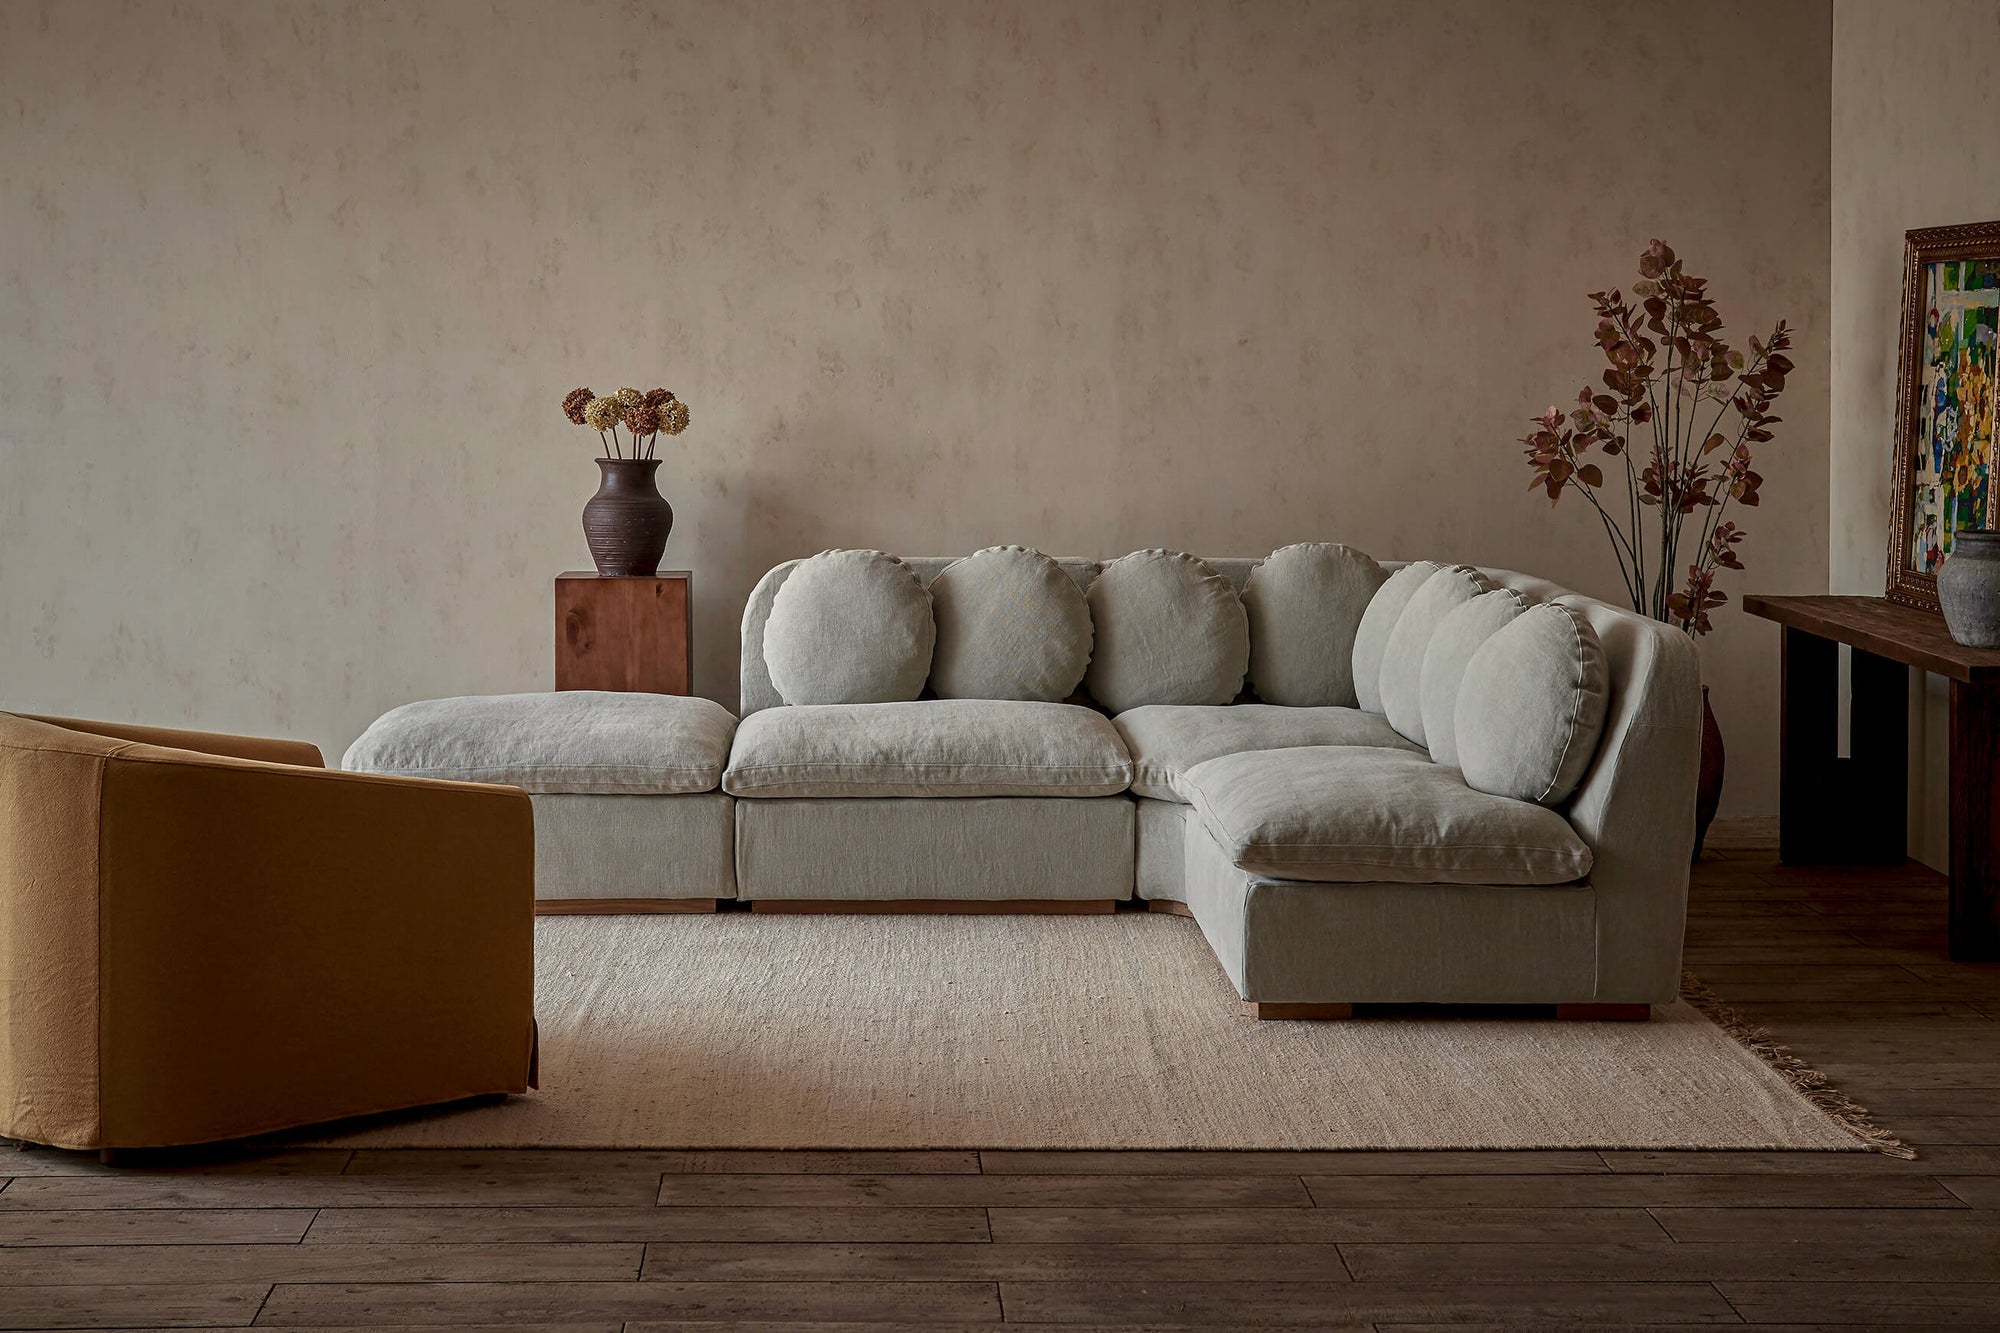 Olea L-Shape Sectional Sofa in Jasmine Rice, a light warm greige Medium Weight Linen, placed in a room decorated with vases, flowers, and a chair.